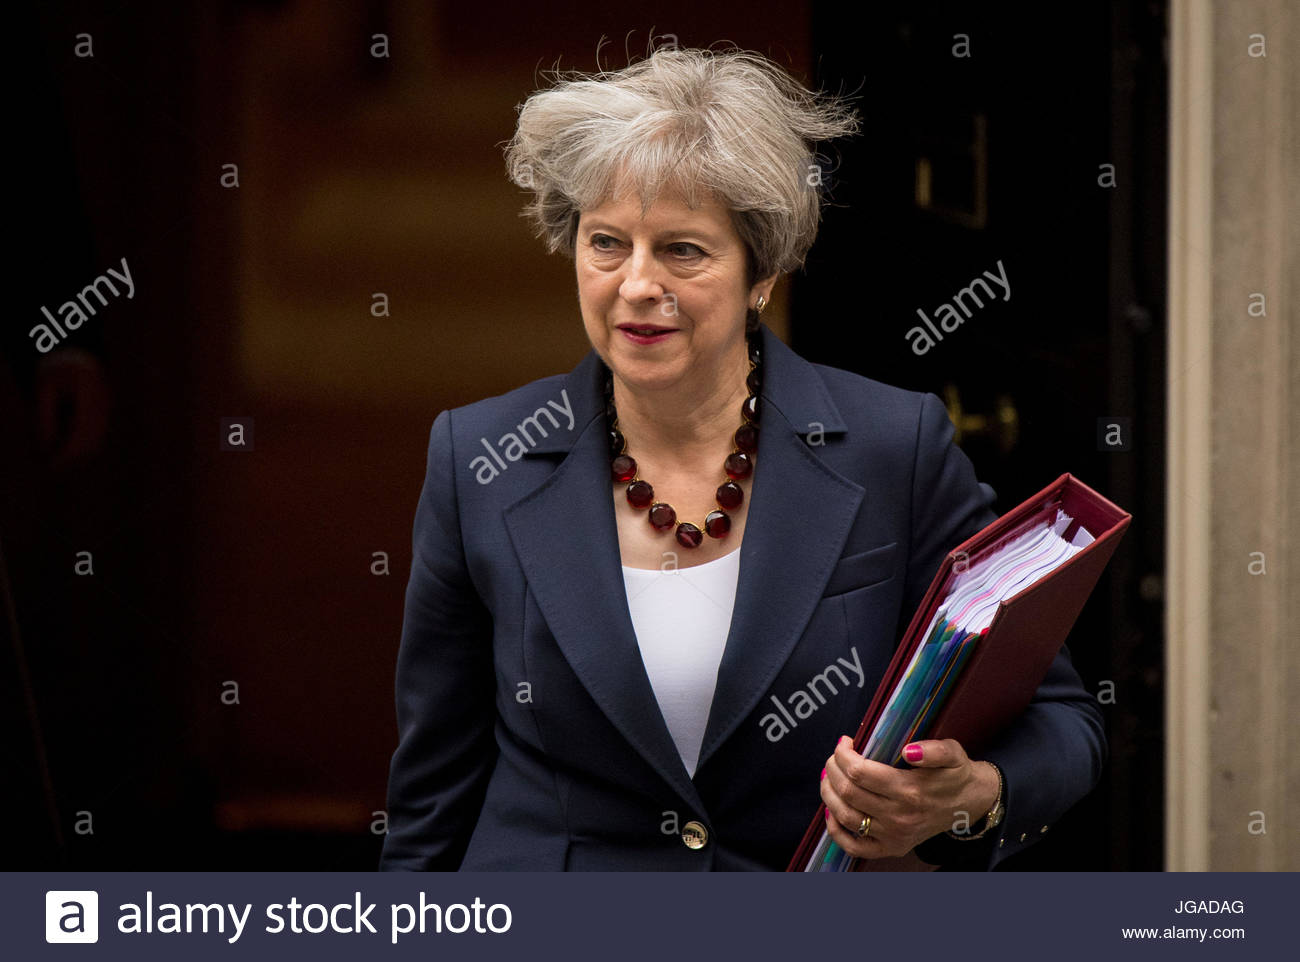 File Photo Dated 28 06 17 Of Prime Minister Theresa May Whose